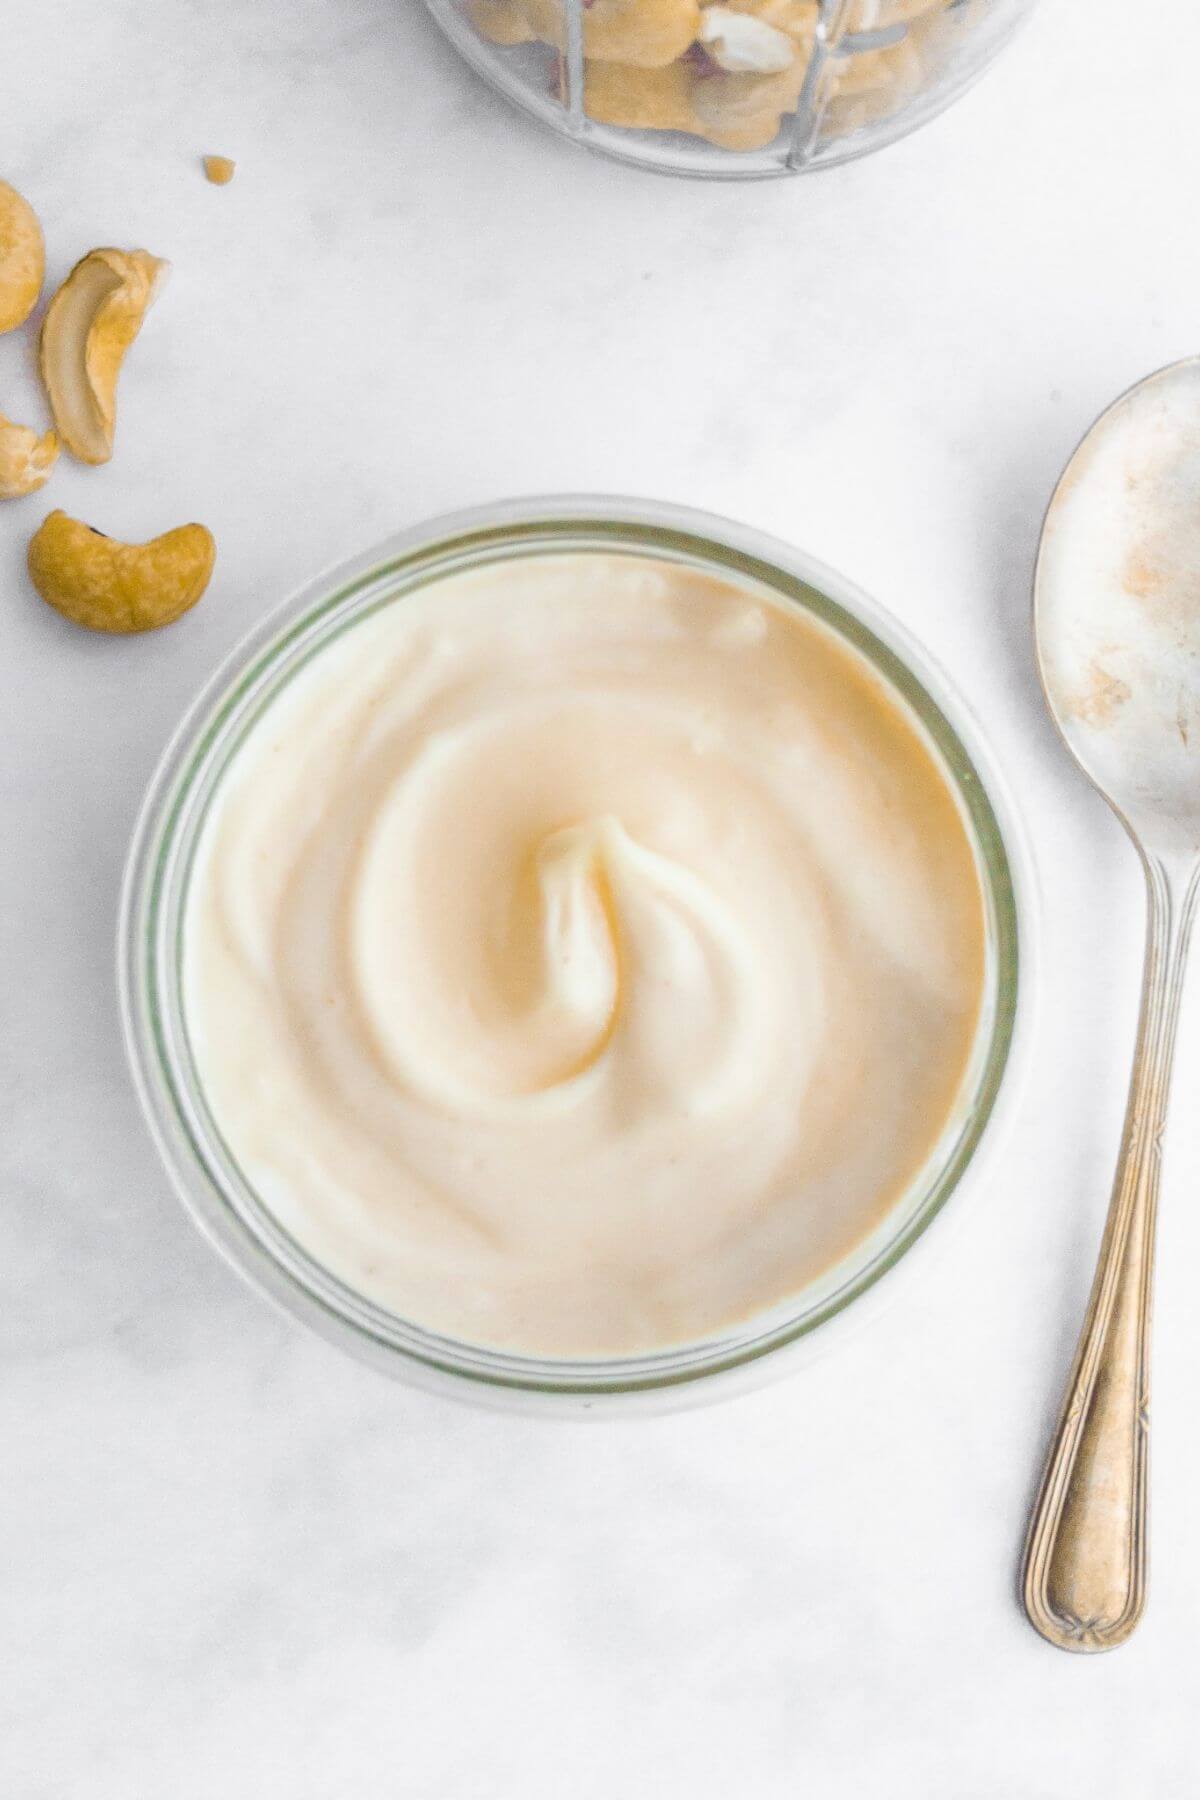 Cashew mayonnaise in a small jar next to a spoon.